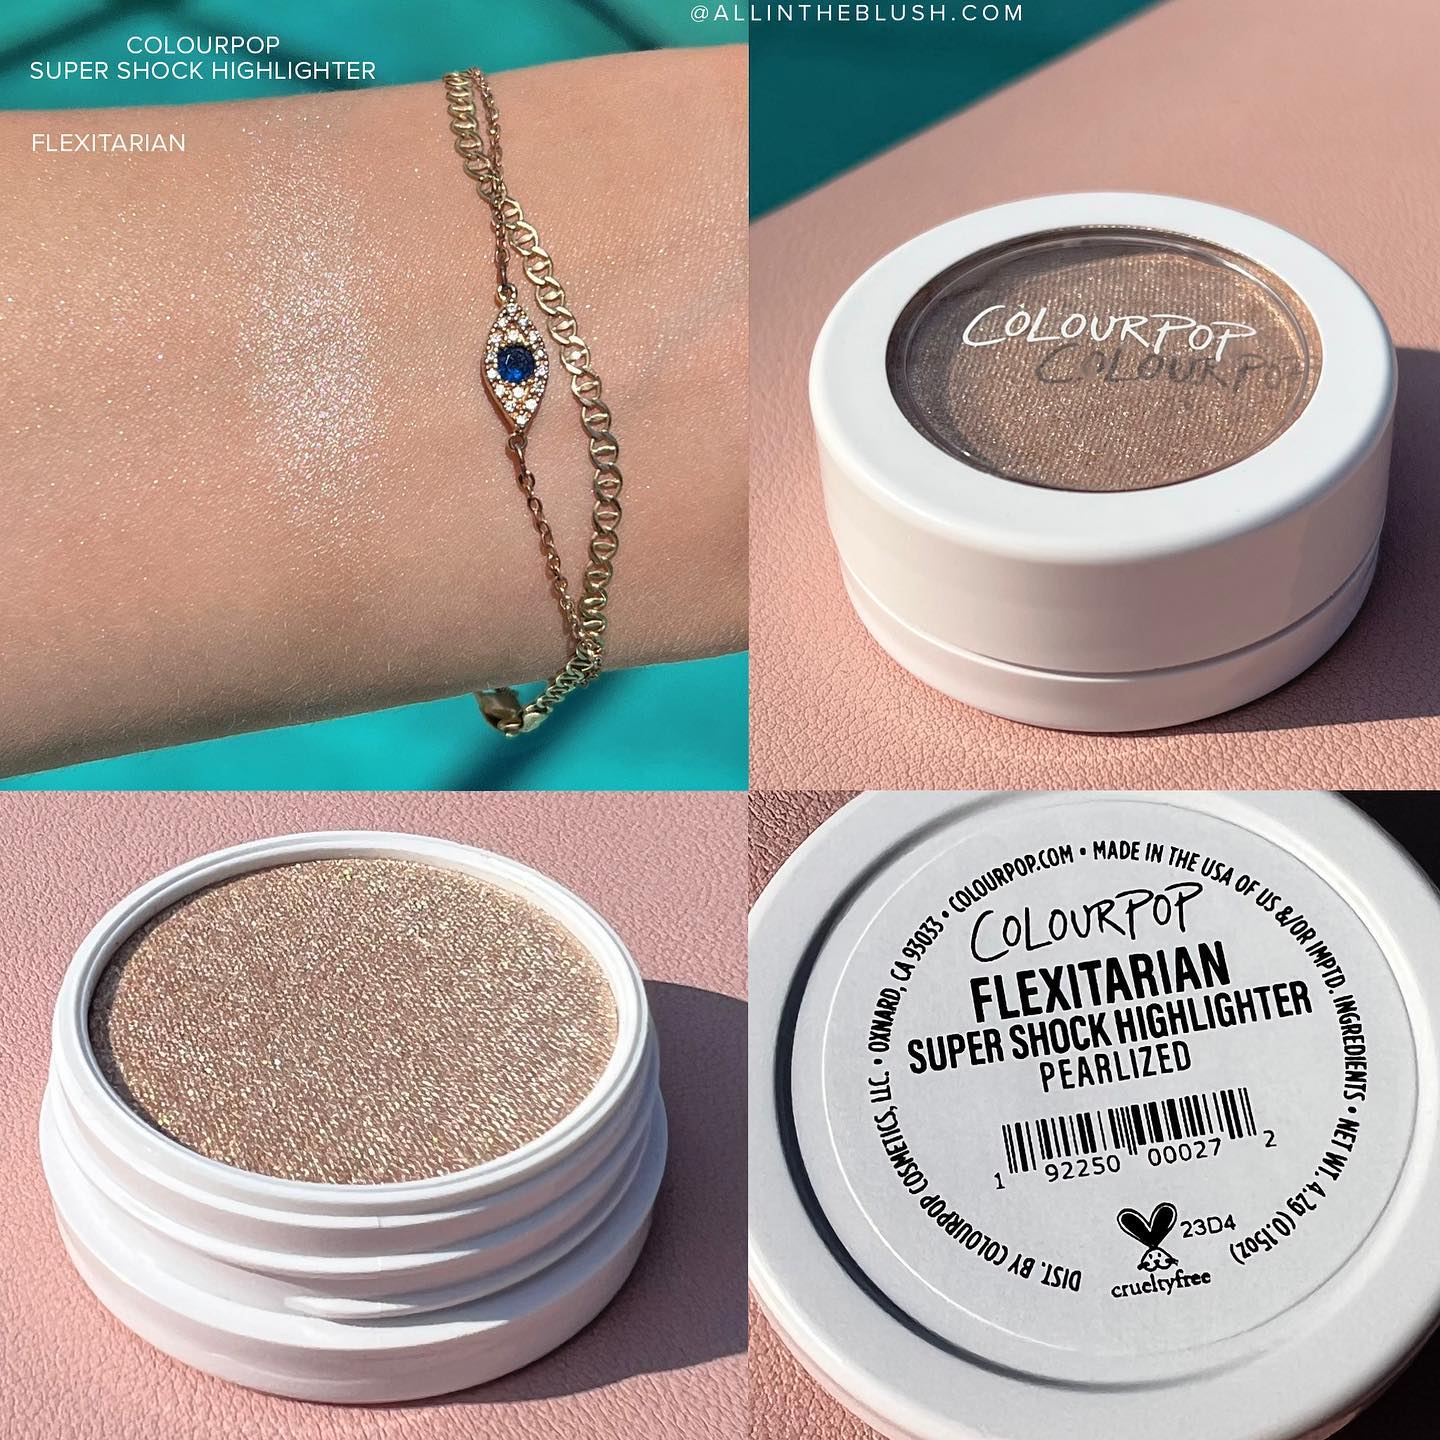 Såkaldte Fare enhed ColourPop Flexitarian Super Shock Highlighter - Review & Swatches - All In  The Blush